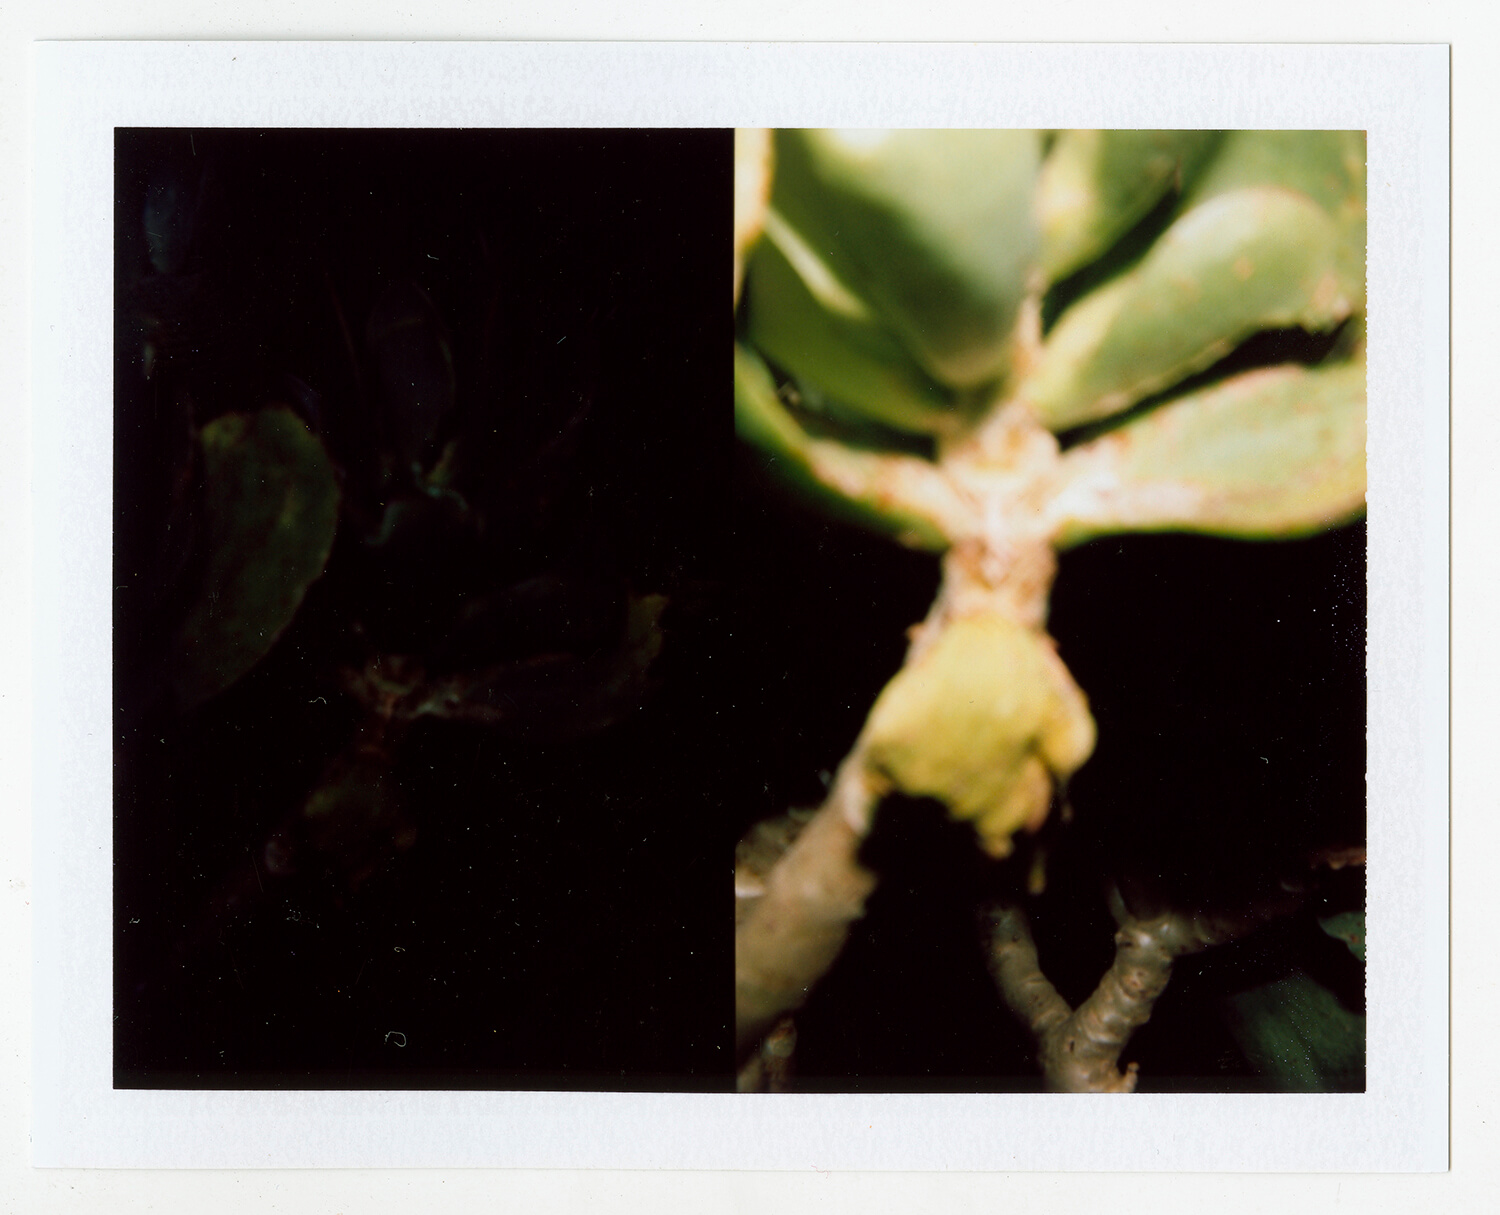  I.D.077, The Polaroid Revolutionary Workers, 2013, Polaroid Picture, 107mm x 86mm 